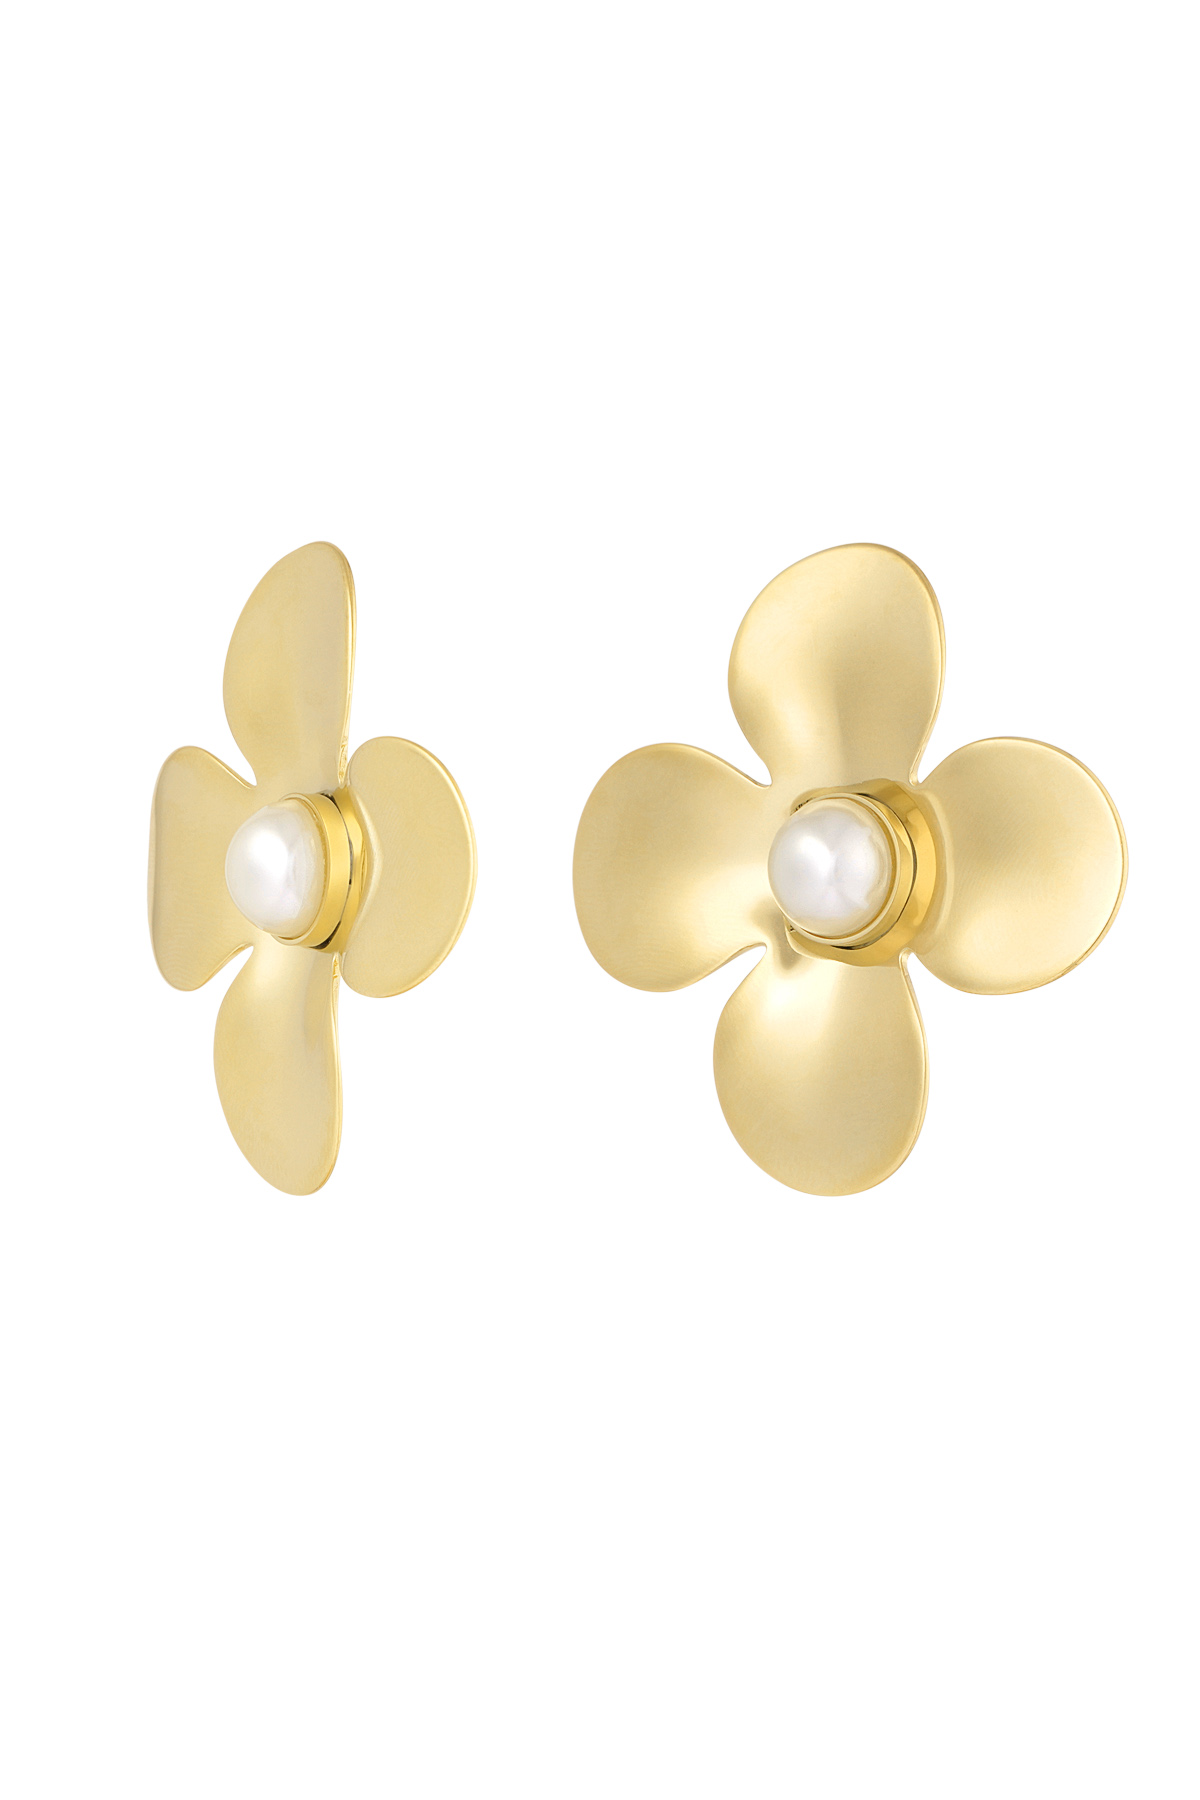 Statement earrings floral pearl - gold